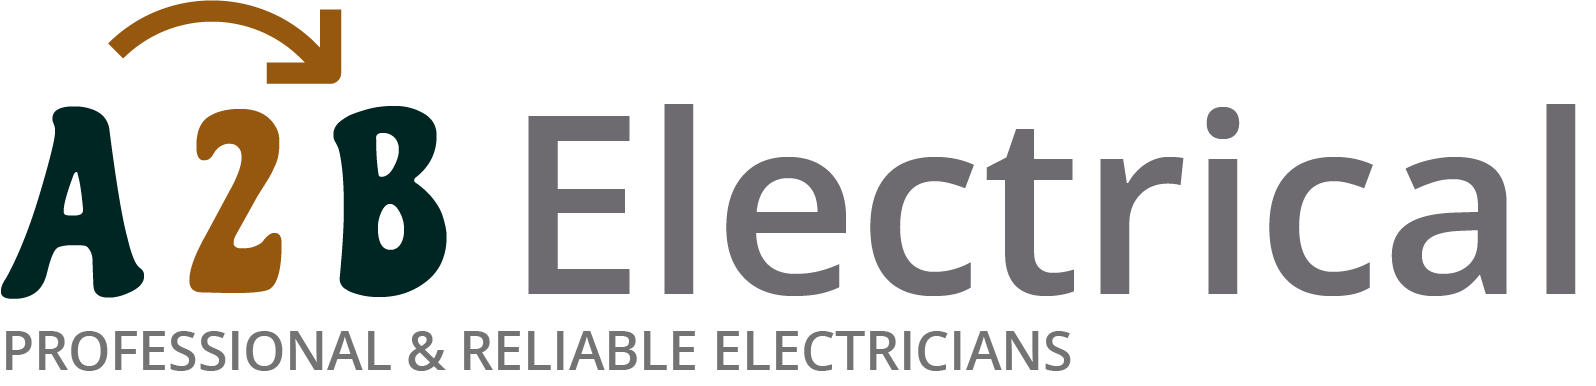 If you have electrical wiring problems in Ecclesfield, we can provide an electrician to have a look for you. 